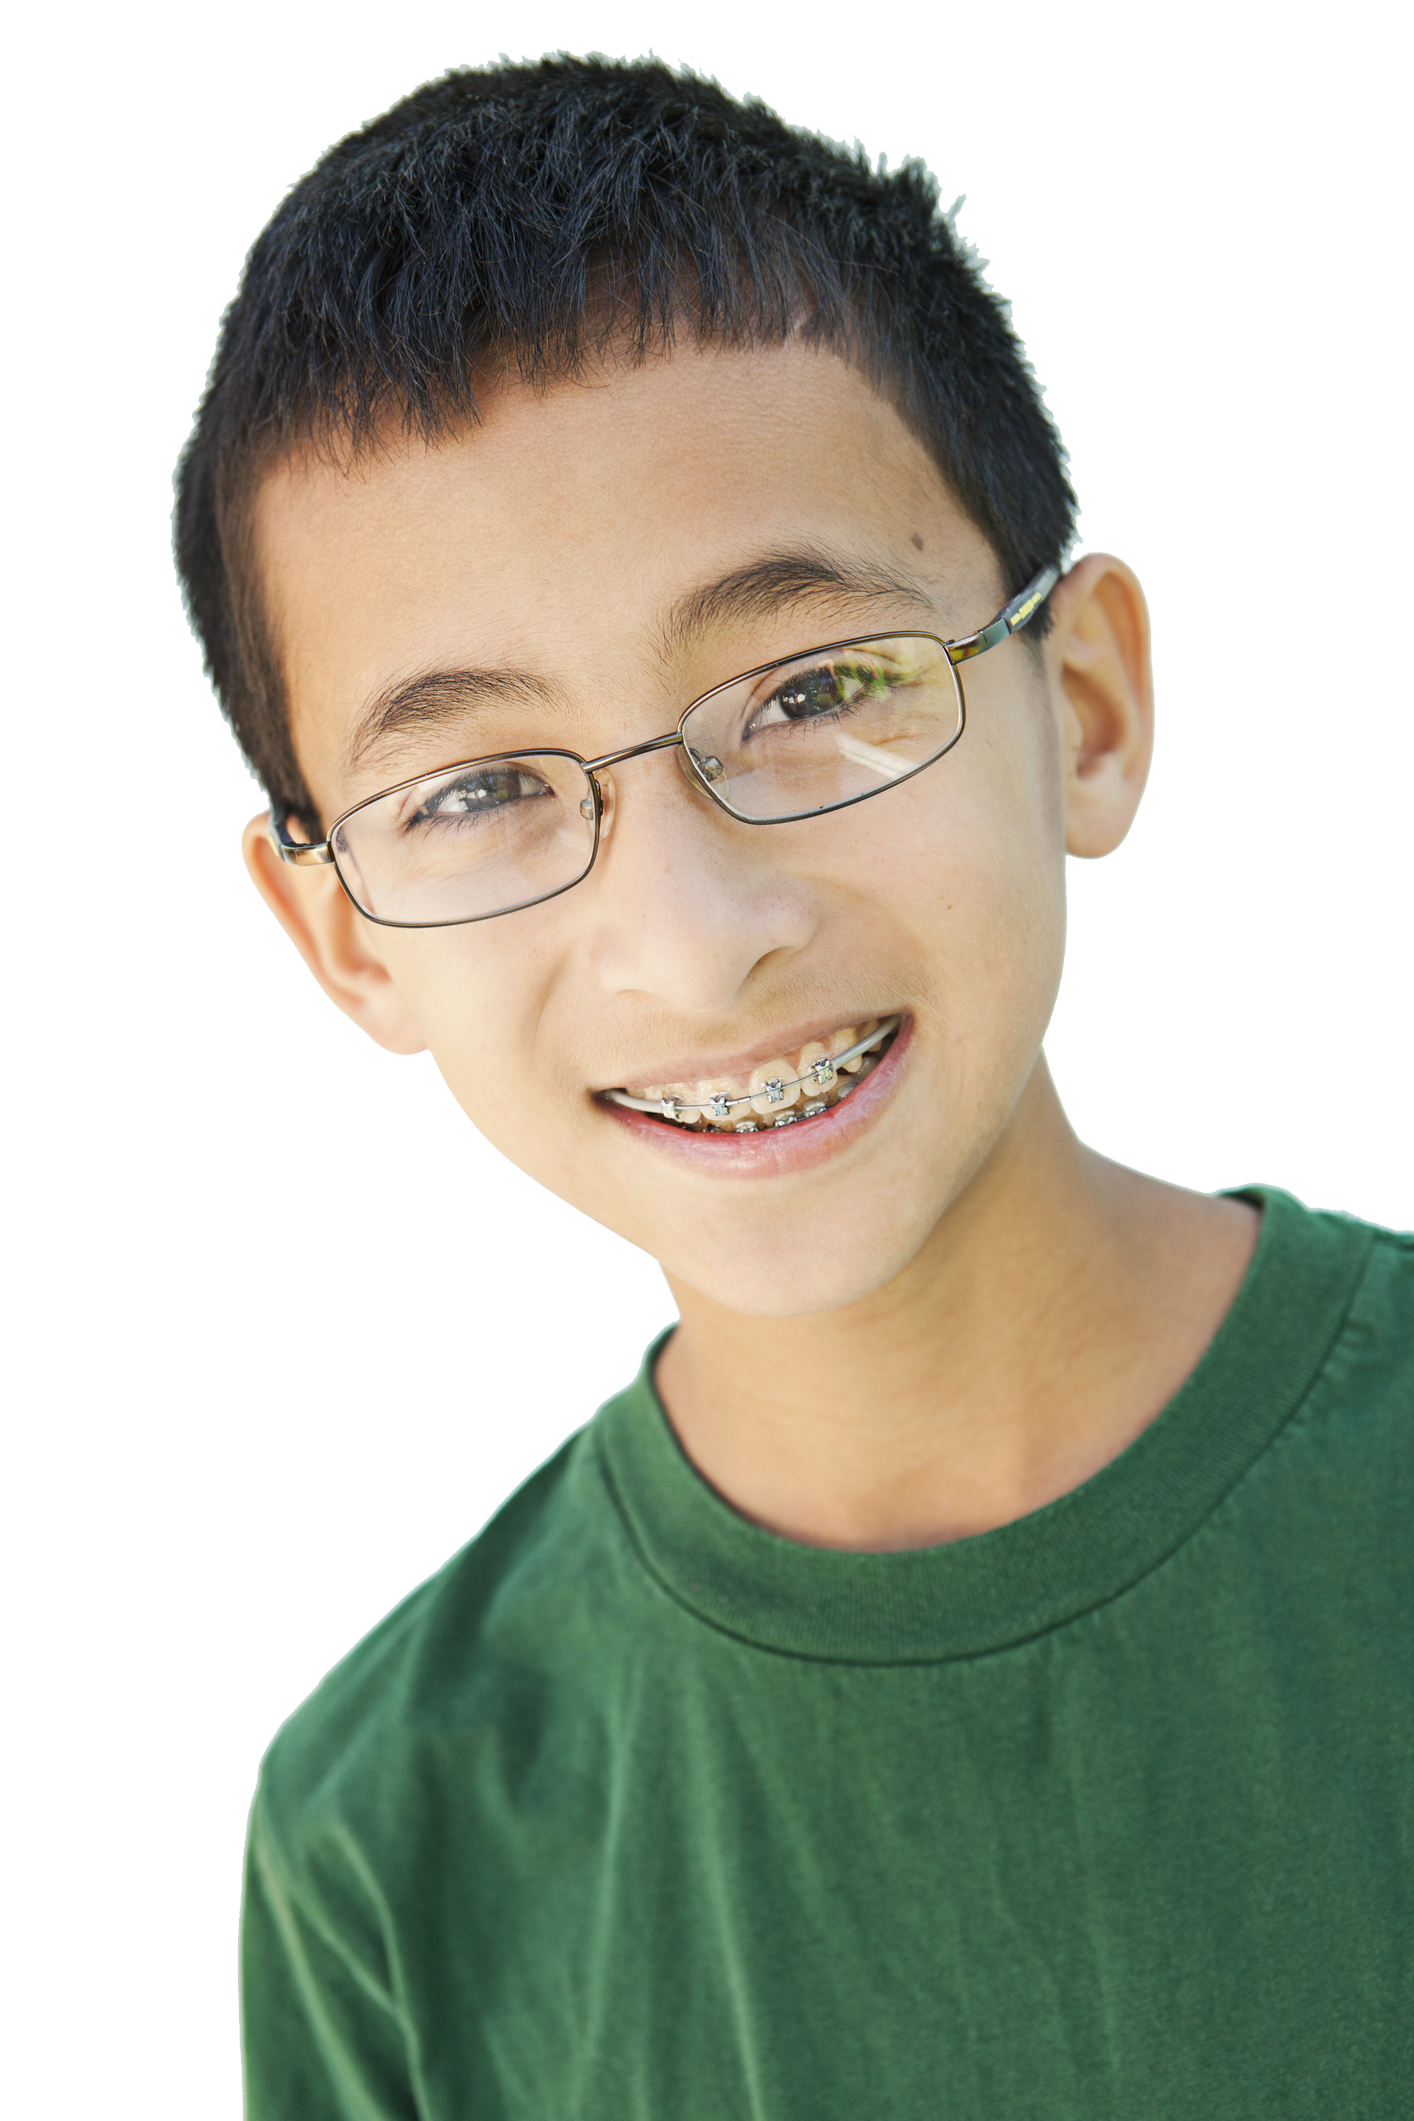 A Boy With Braces - Bellville, OH - Clearfork Family Dentistry